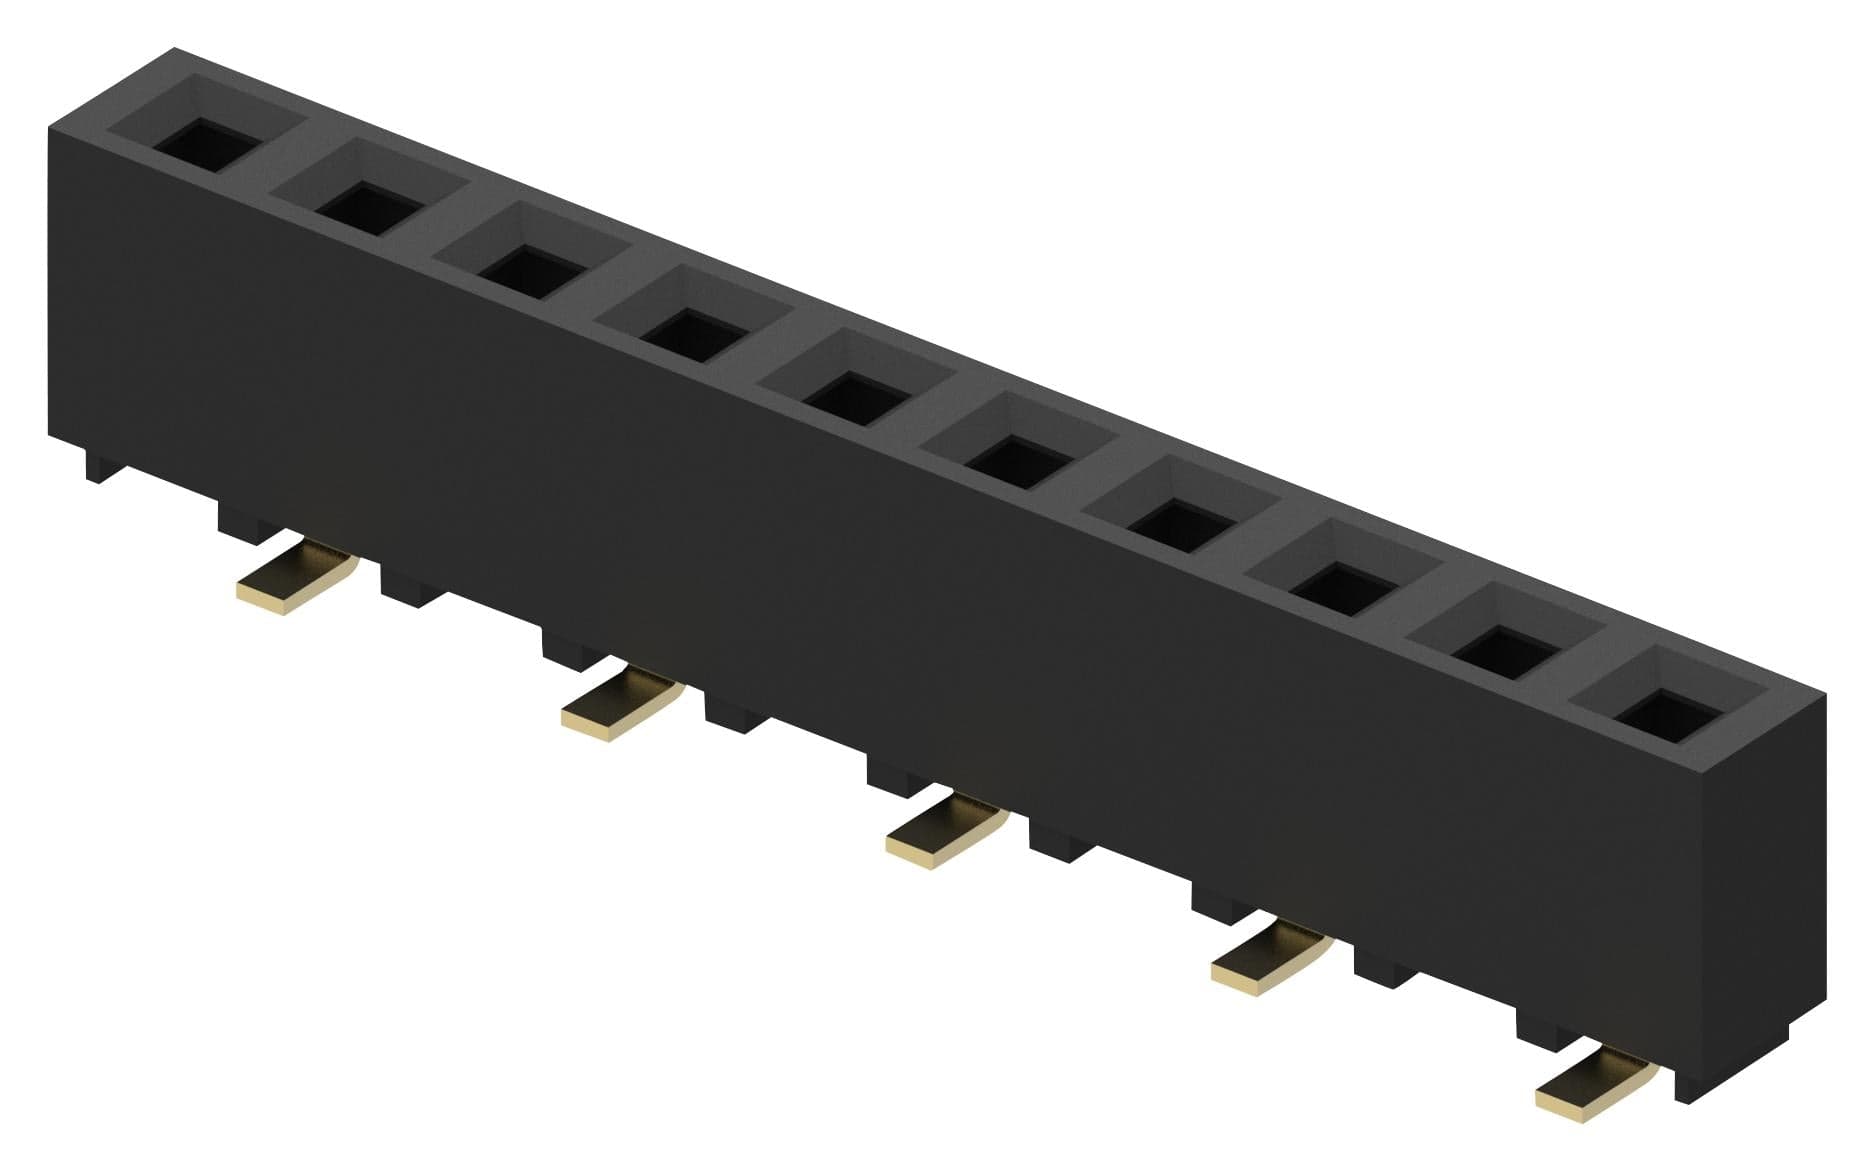 GCT (GLOBAL CONNECTOR TECHNOLOGY) Board-to-Board BG125-03-A-1-1-0440-N-D CONNECTOR, RCPT, 3POS, 1ROW, 2.54MM GCT (GLOBAL CONNECTOR TECHNOLOGY) 2577326 BG125-03-A-1-1-0440-N-D